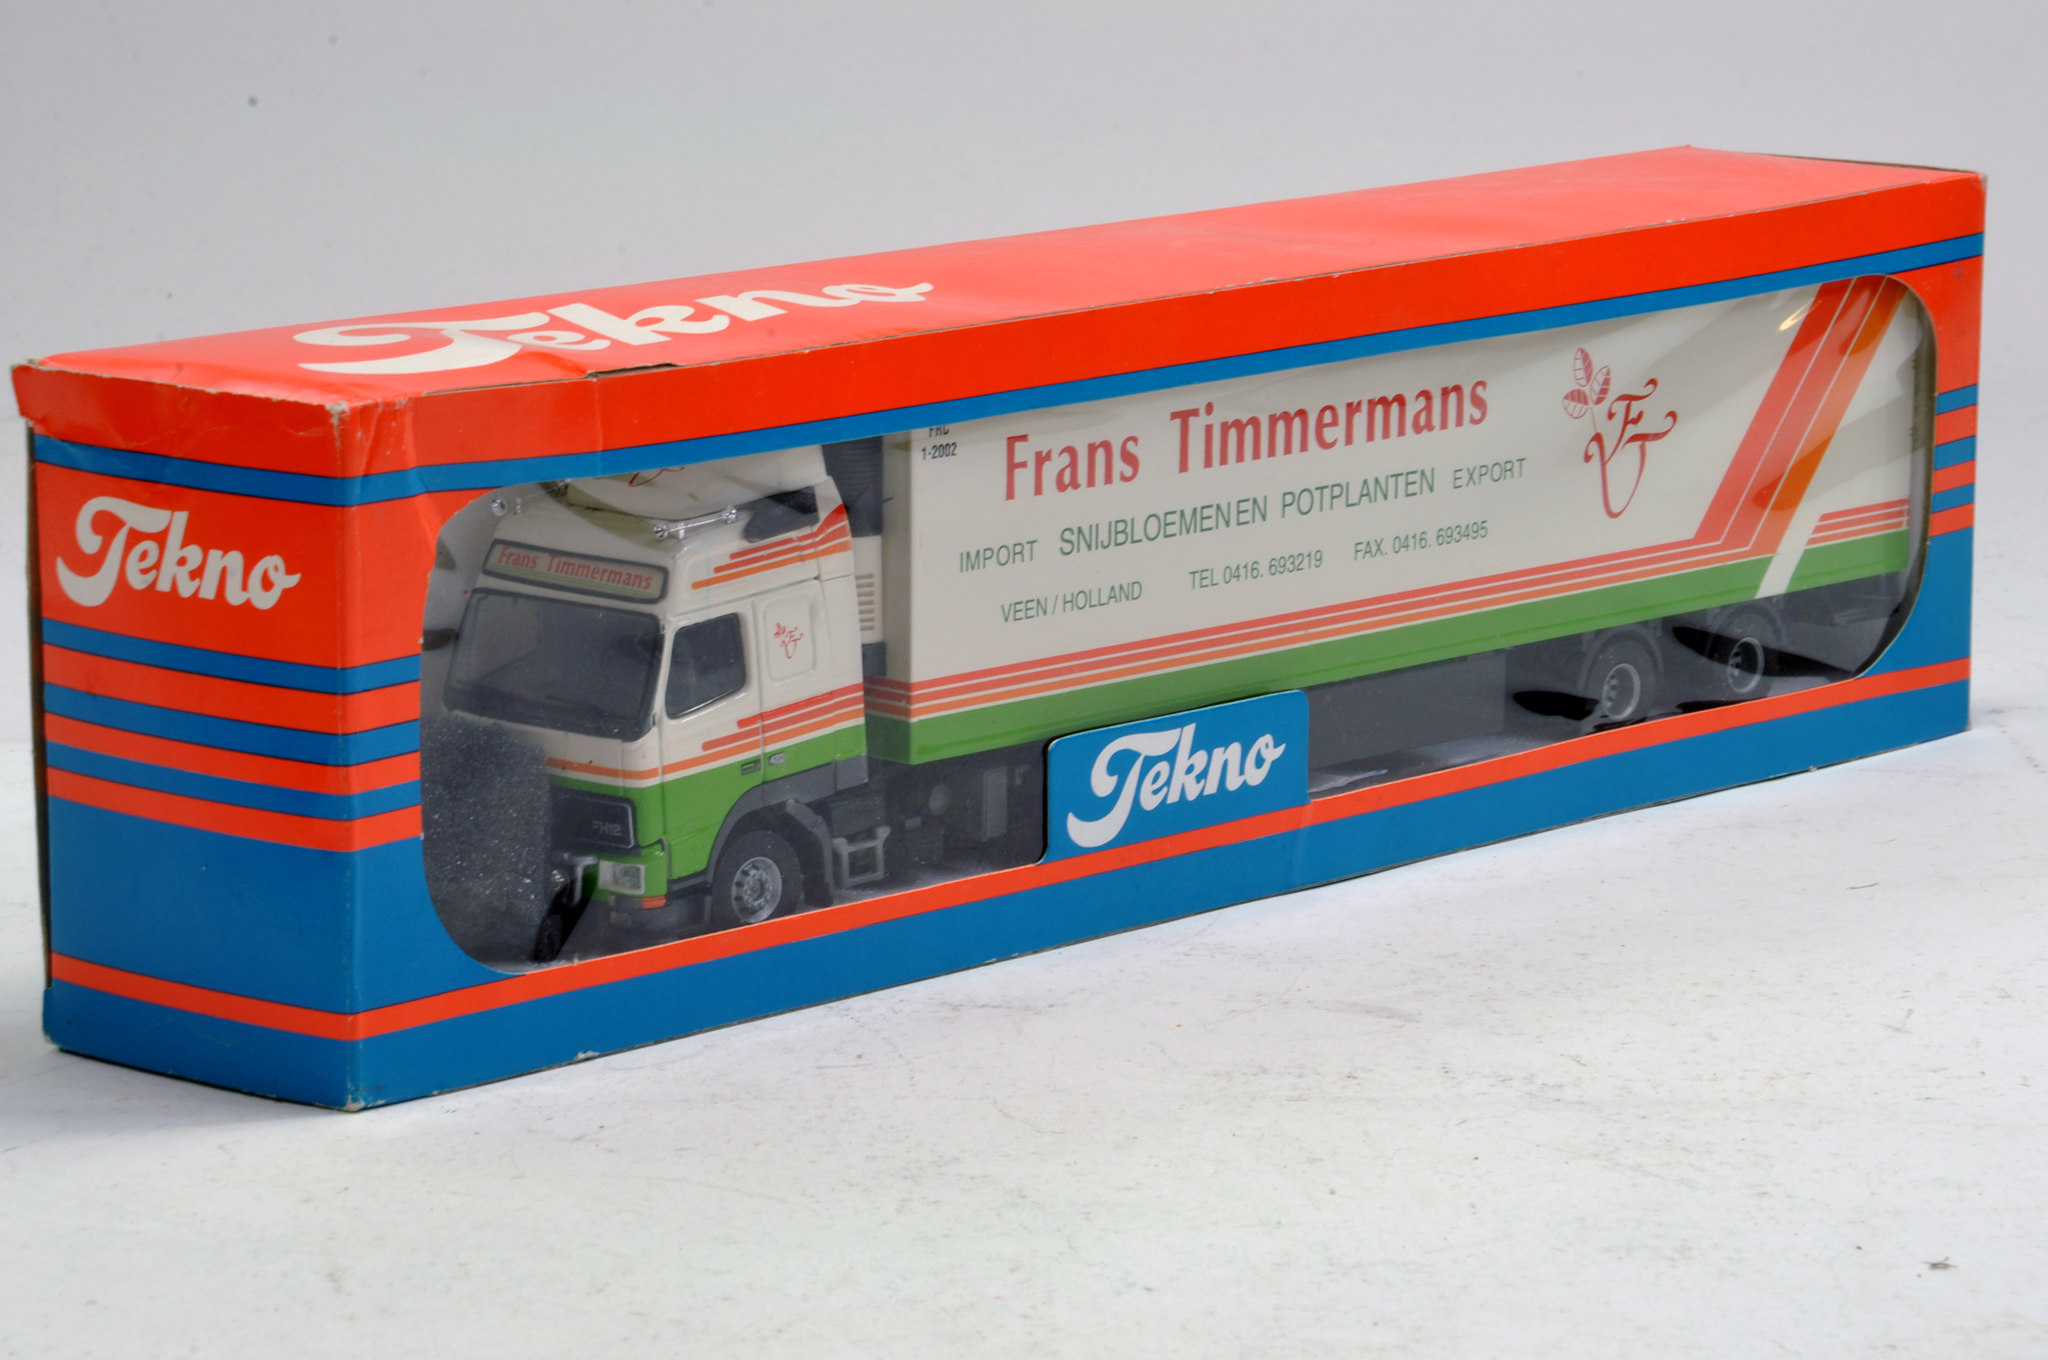 Tekno 1/50 Truck issue comprising Volvo FH12 Fridge Trailer in livery of Frans Timmermans. Looks